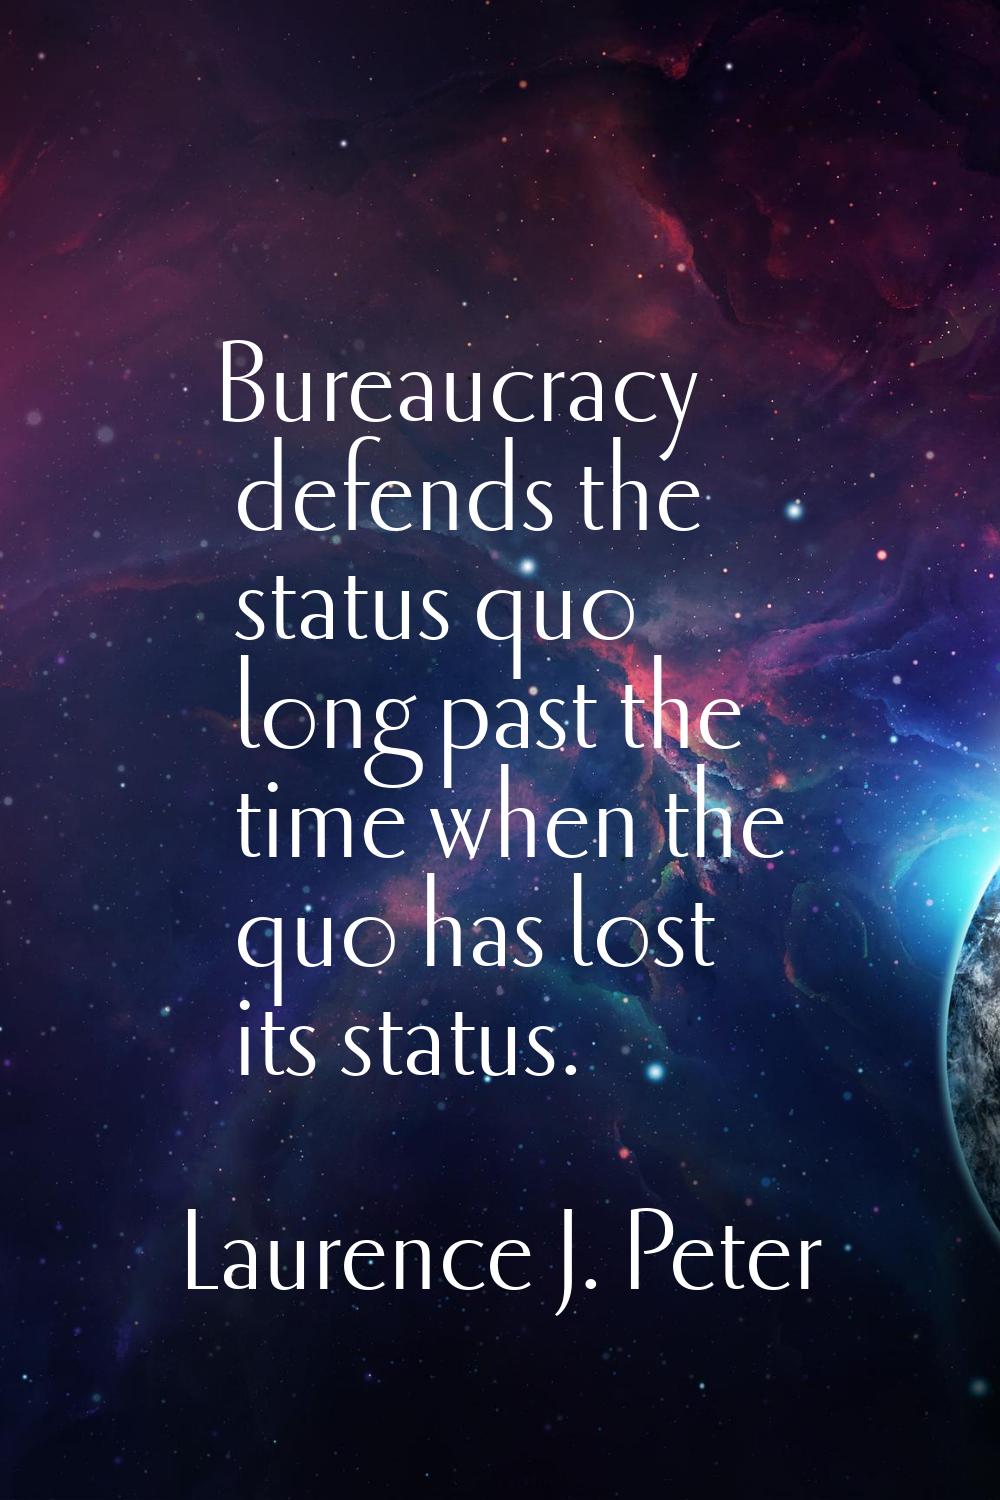 Bureaucracy defends the status quo long past the time when the quo has lost its status.